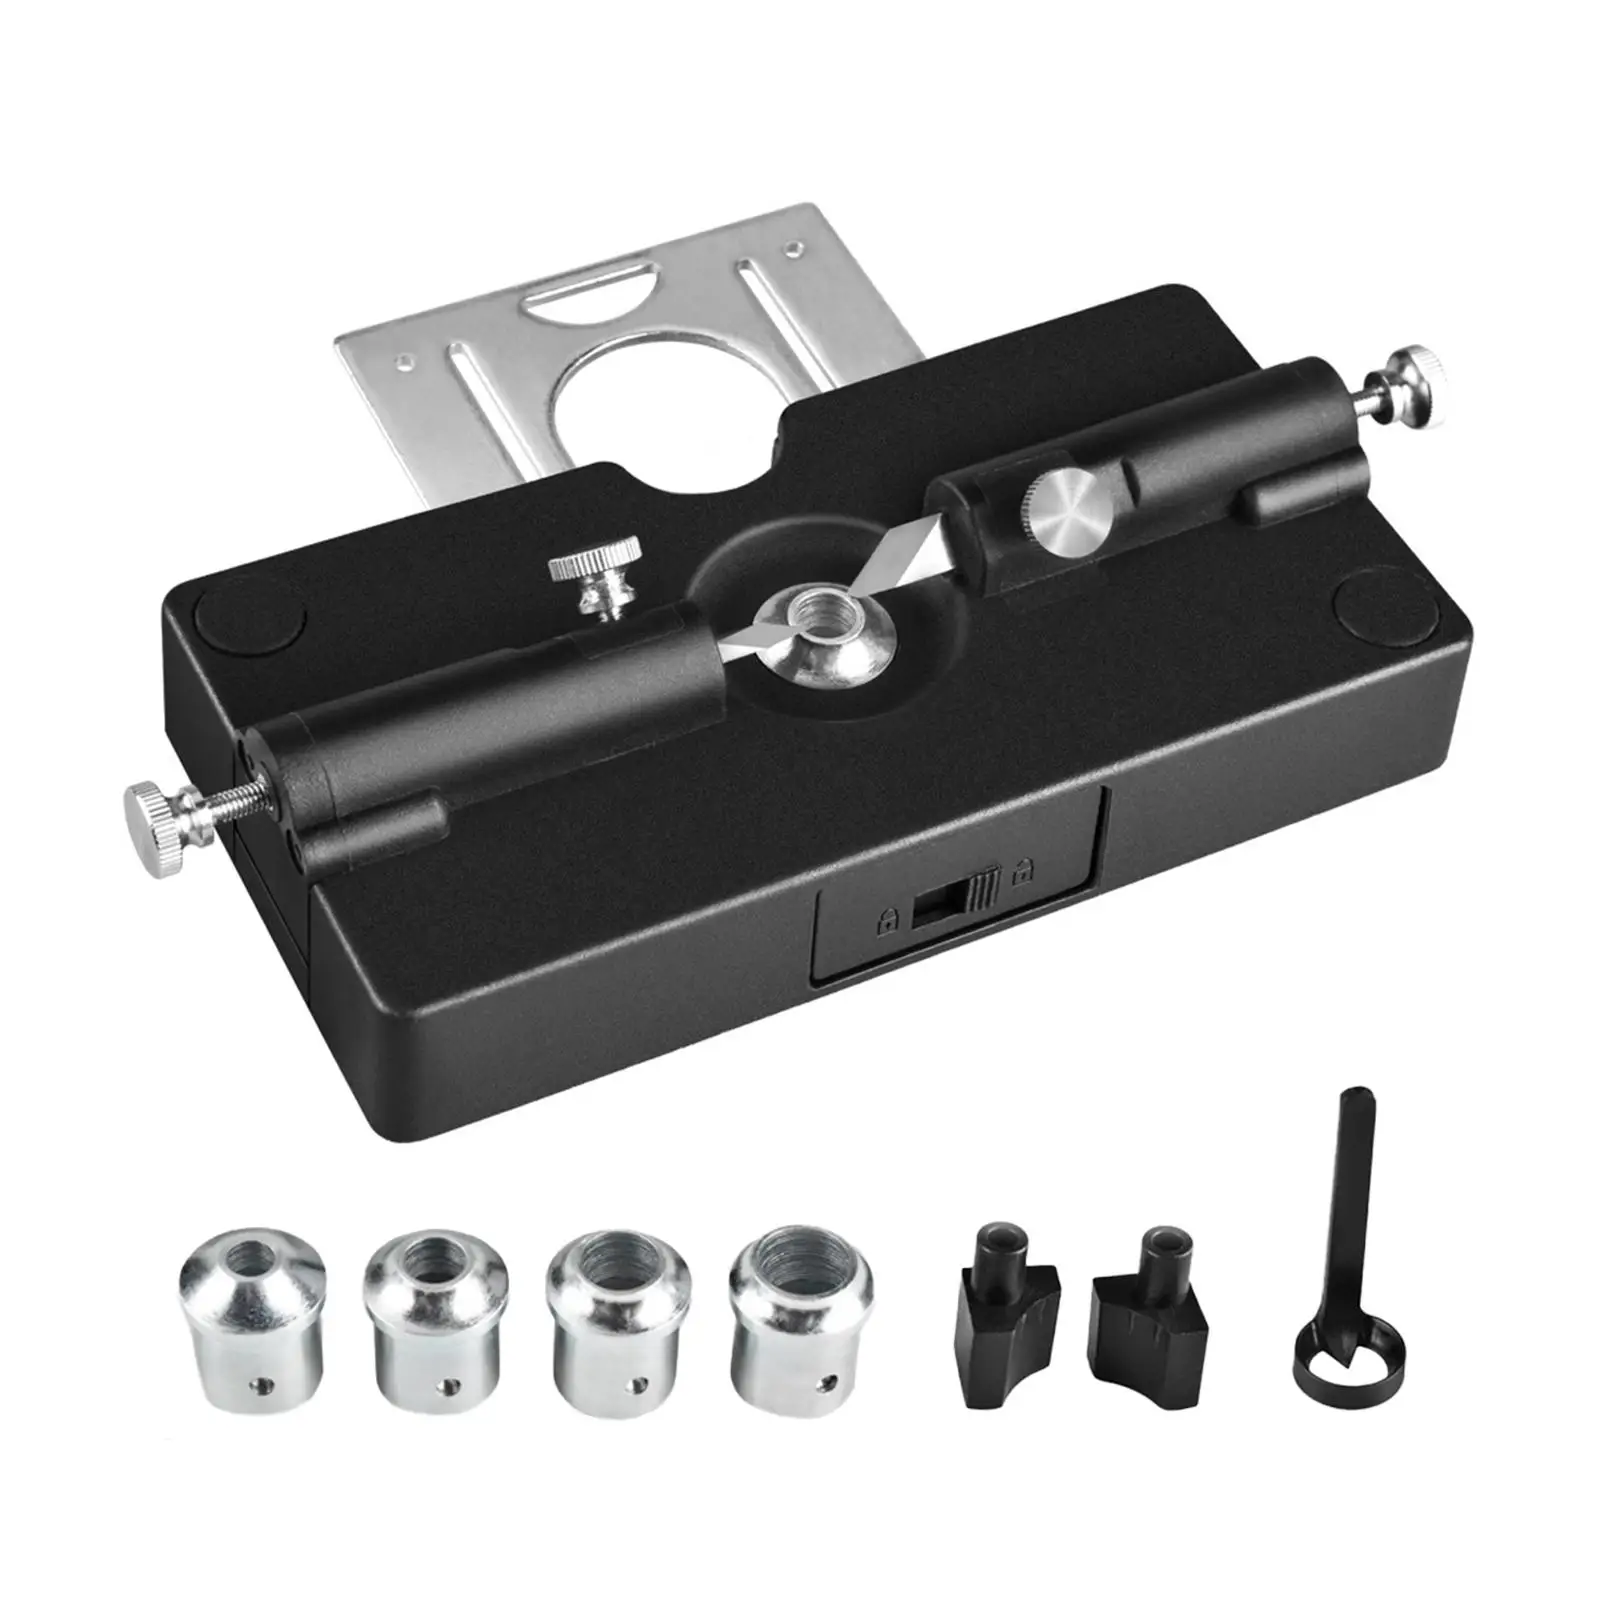 Doweling Jig Kit Drilling Locator for Woodworking Hole Drilling Guide Portable Puncher with Drill Bushings Pocket Hole Jig